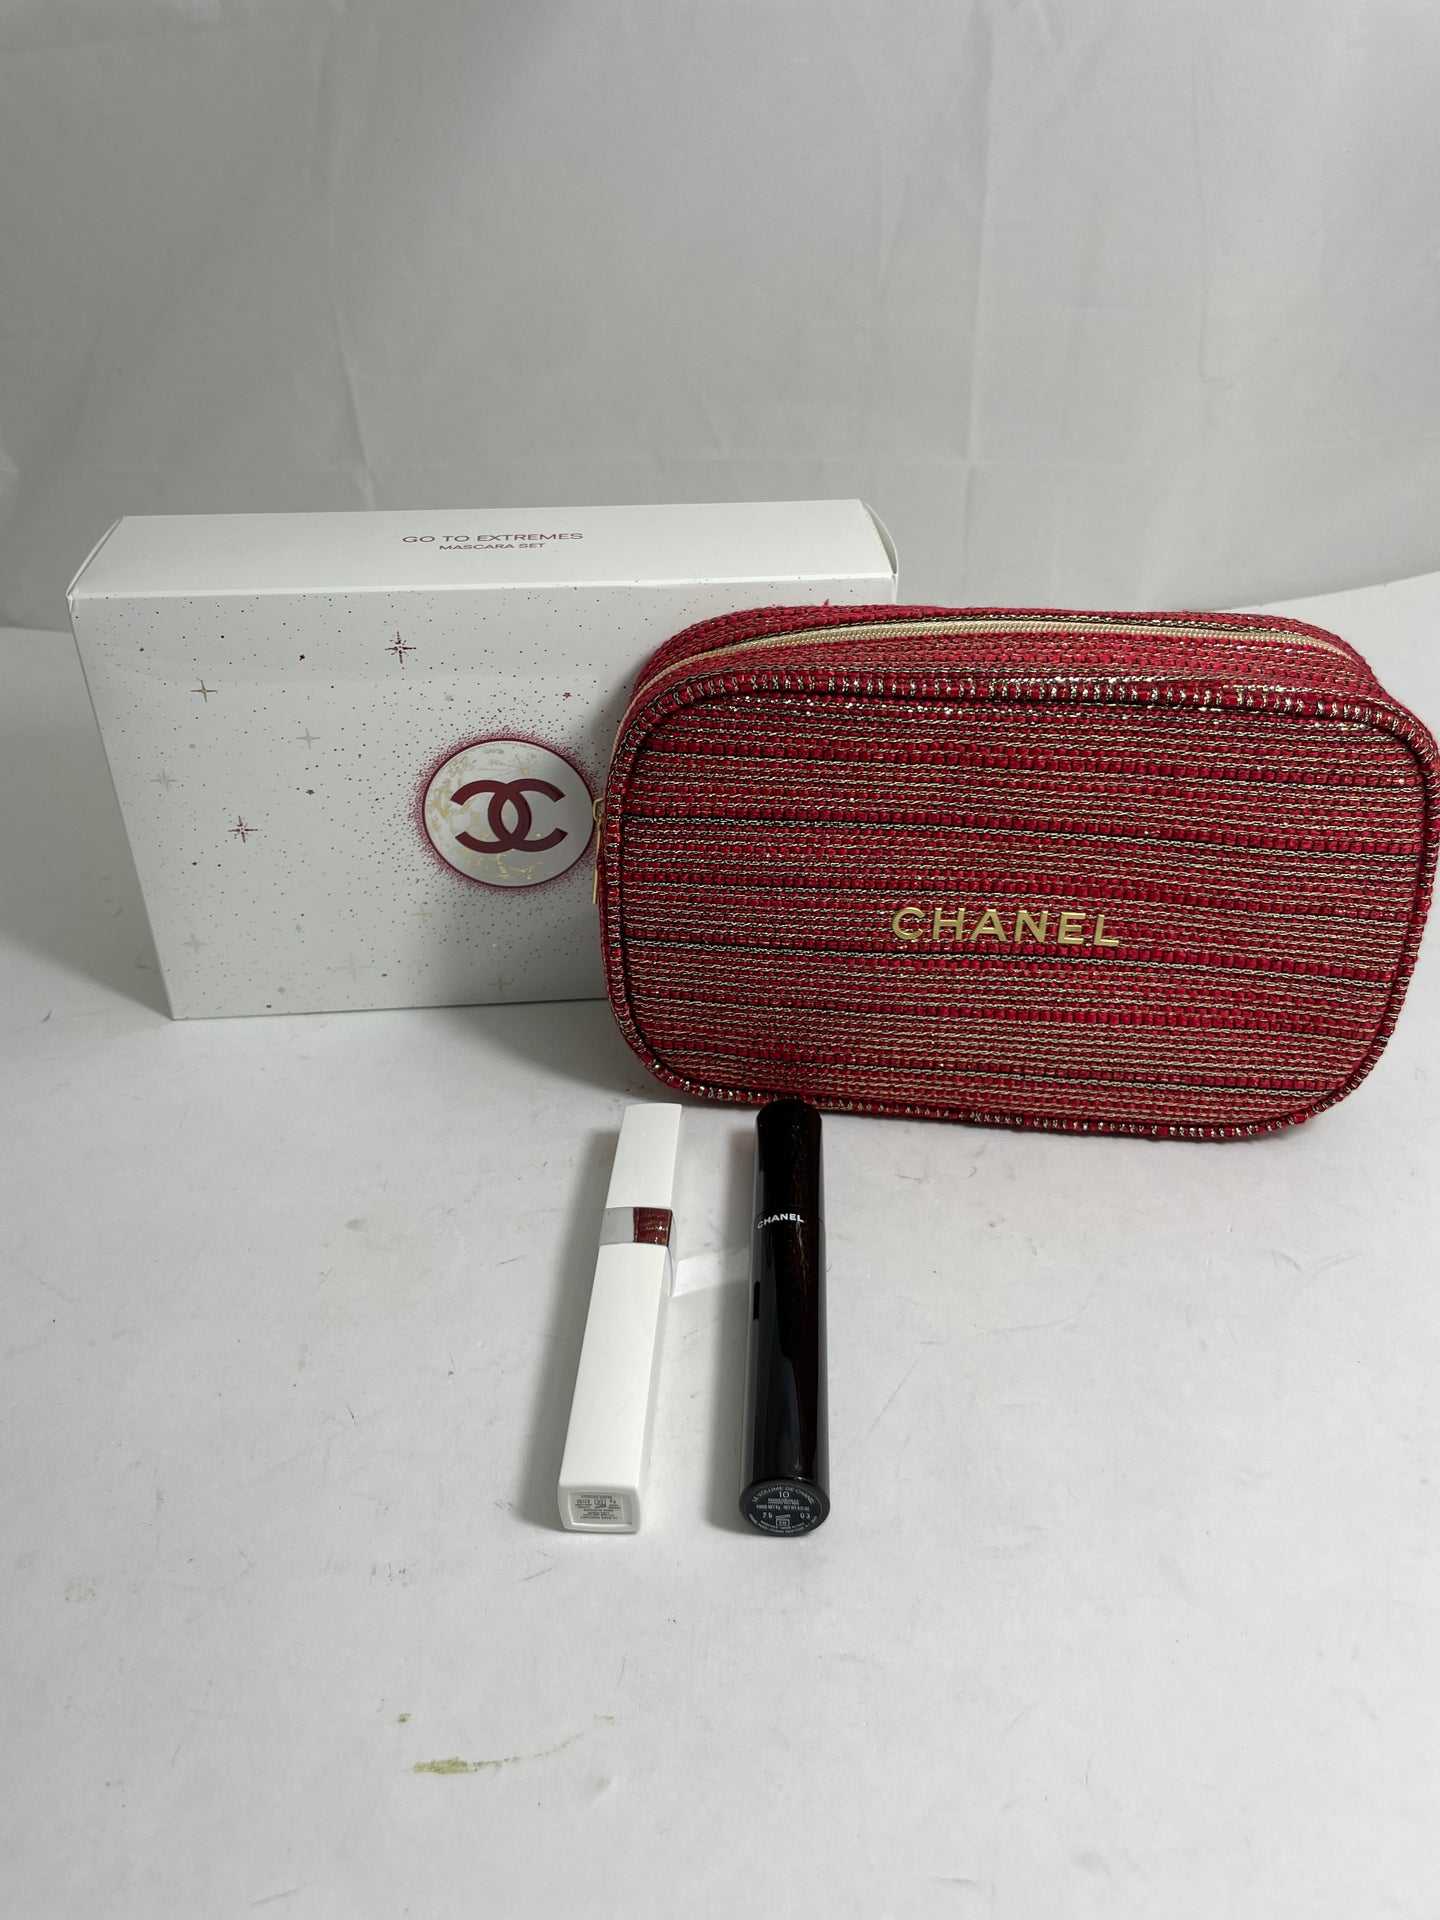 Chanel MOISTURE MUST-HAVES Holiday Gift Set